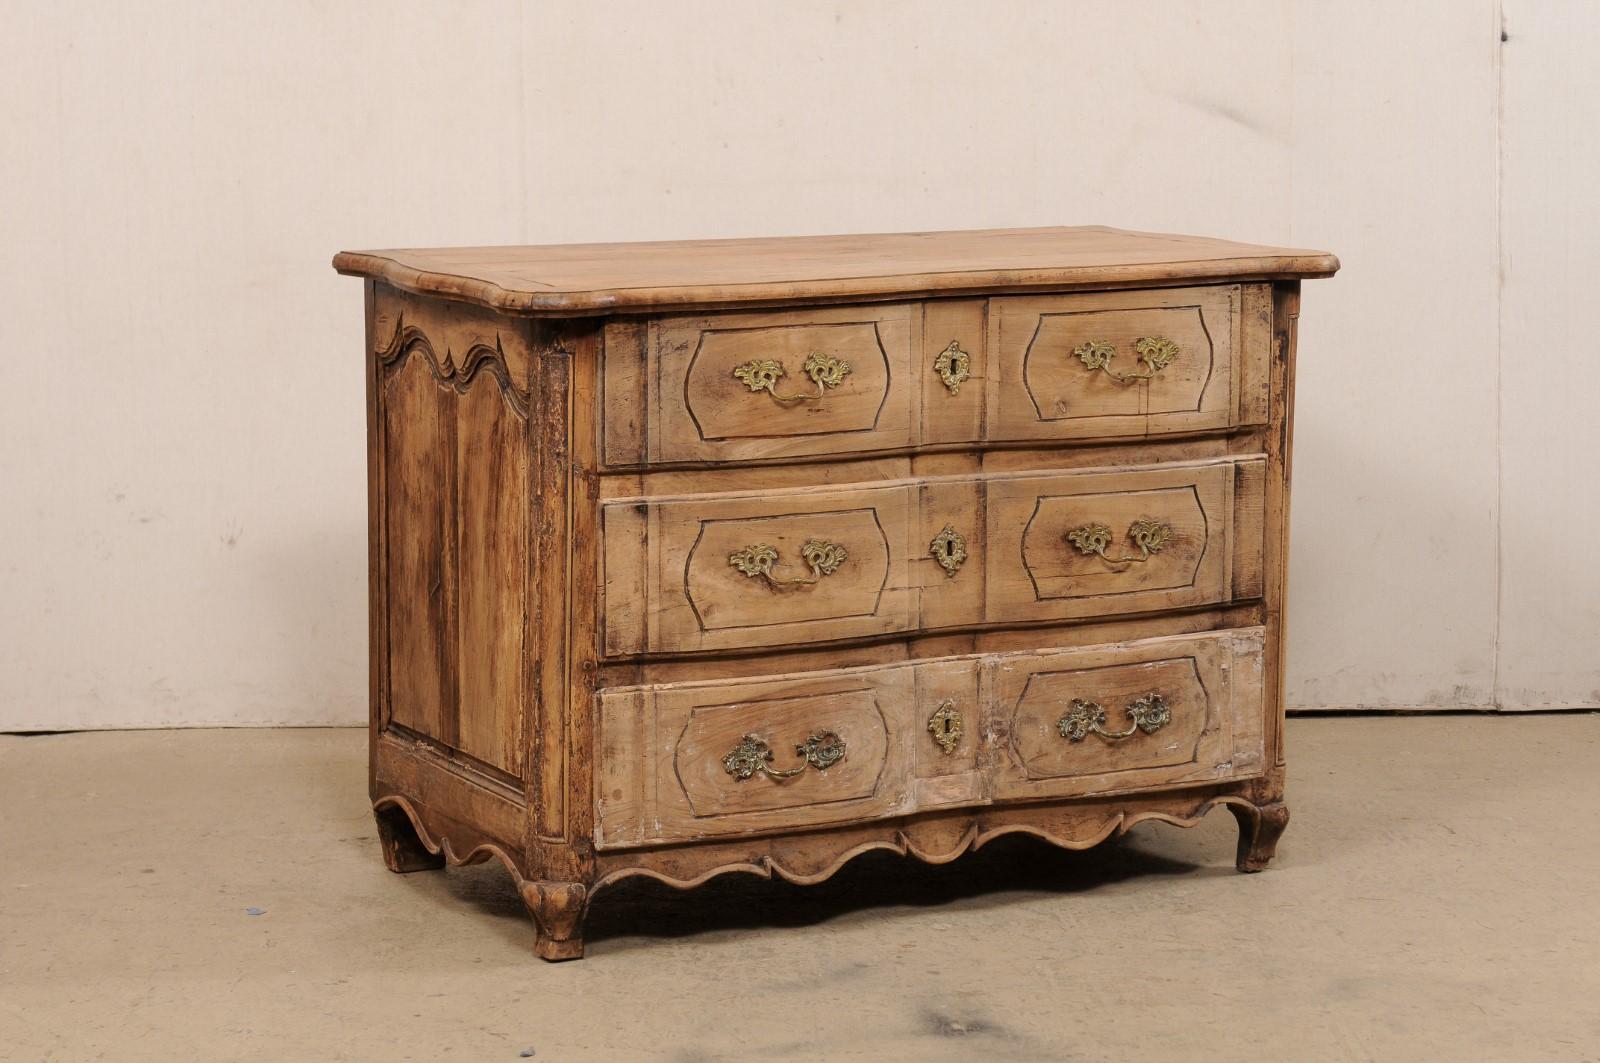 A French Louis XV carved-wood commode, with subtle serpentine front, from the 18th century. This antique chest from France has a shapely top with scalloped sides and serpentine front, carved to mimic the shape of the case below, which houses three